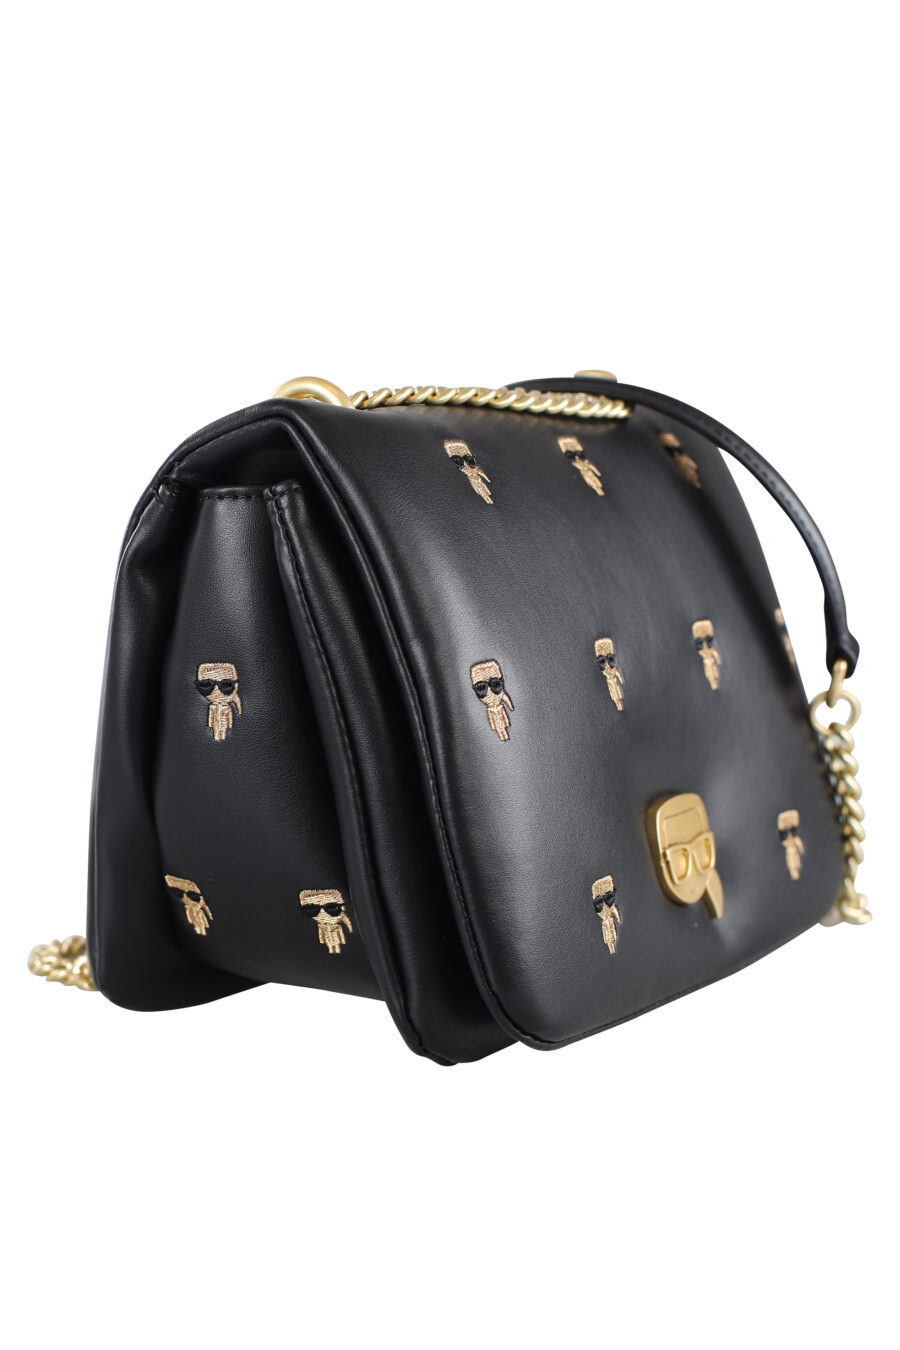 Mini black "all over logo" shoulder bag in studs and golden chain - IMG 6962